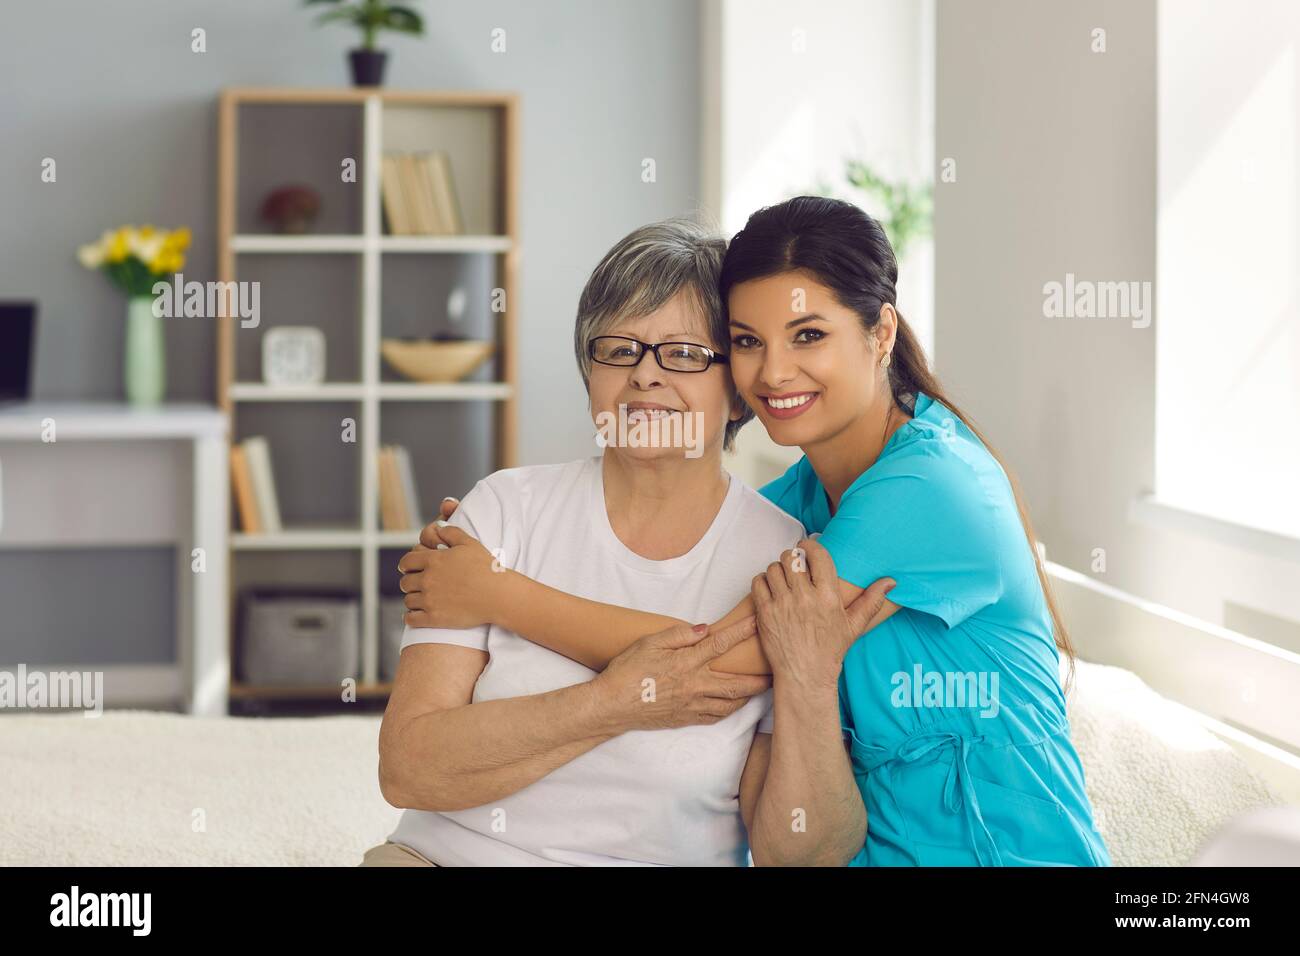 Happy senior woman together with her home care nurse or caregiver smiling at camera Stock Photo